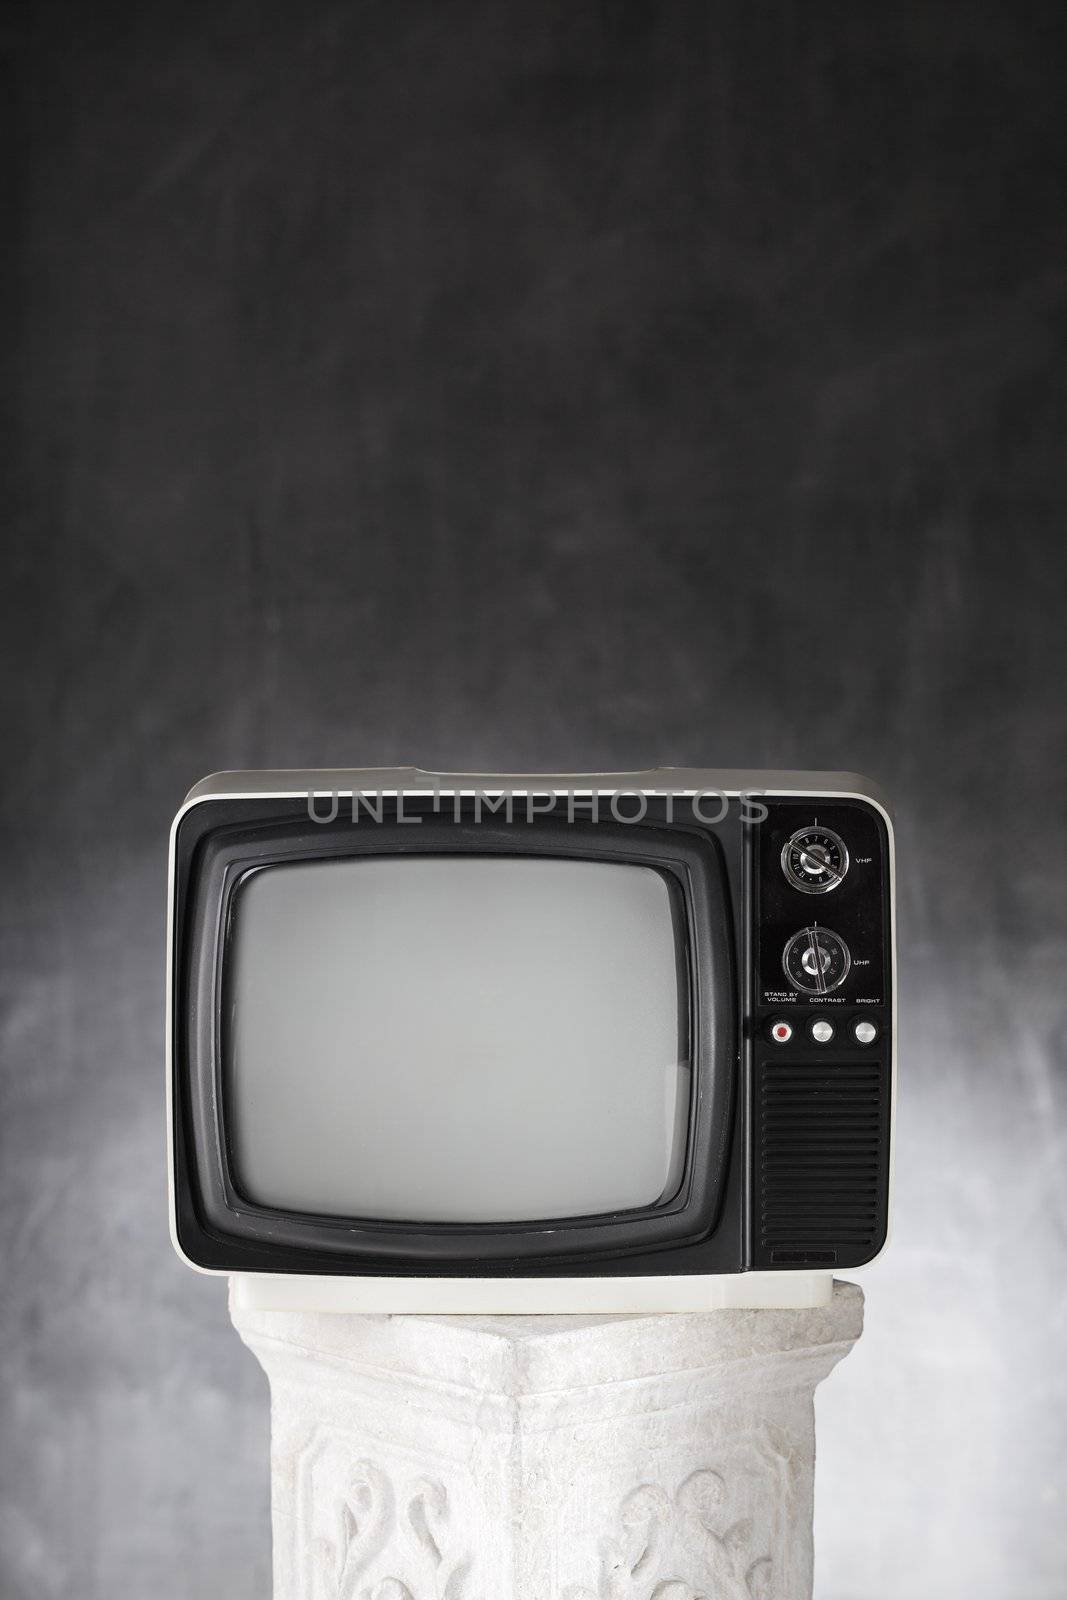 Television by Stocksnapper